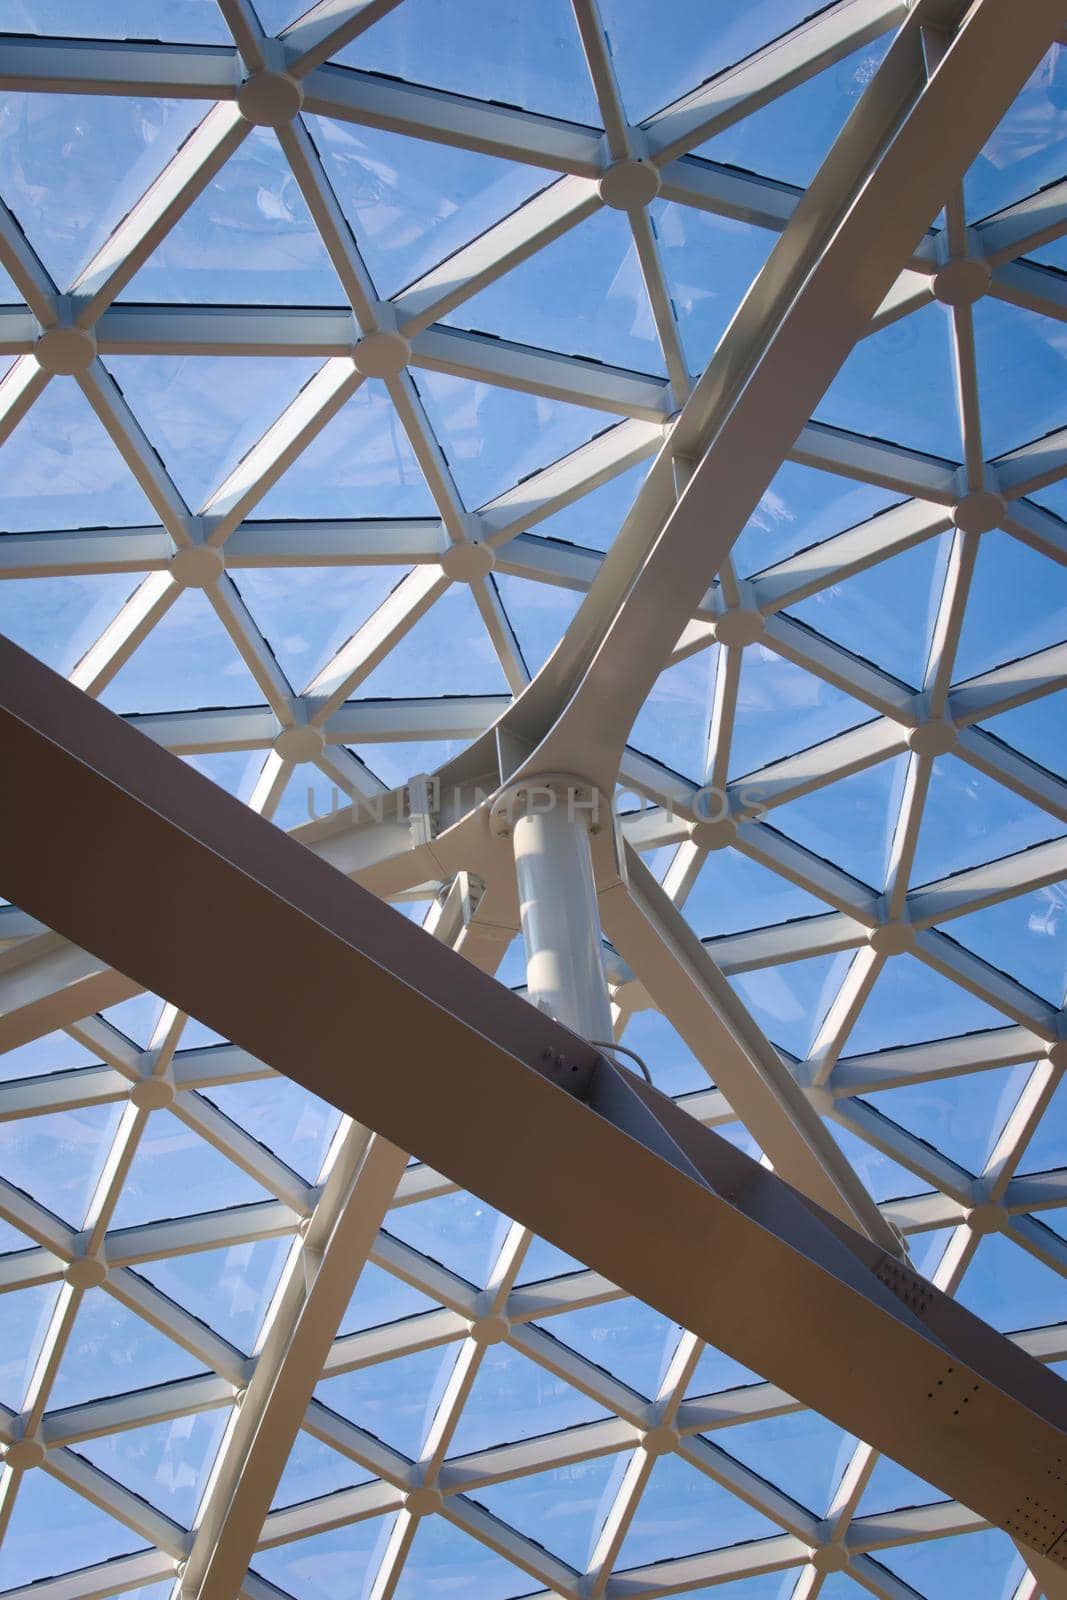 Glass dome ceiling in a modern building. Architectural detail.